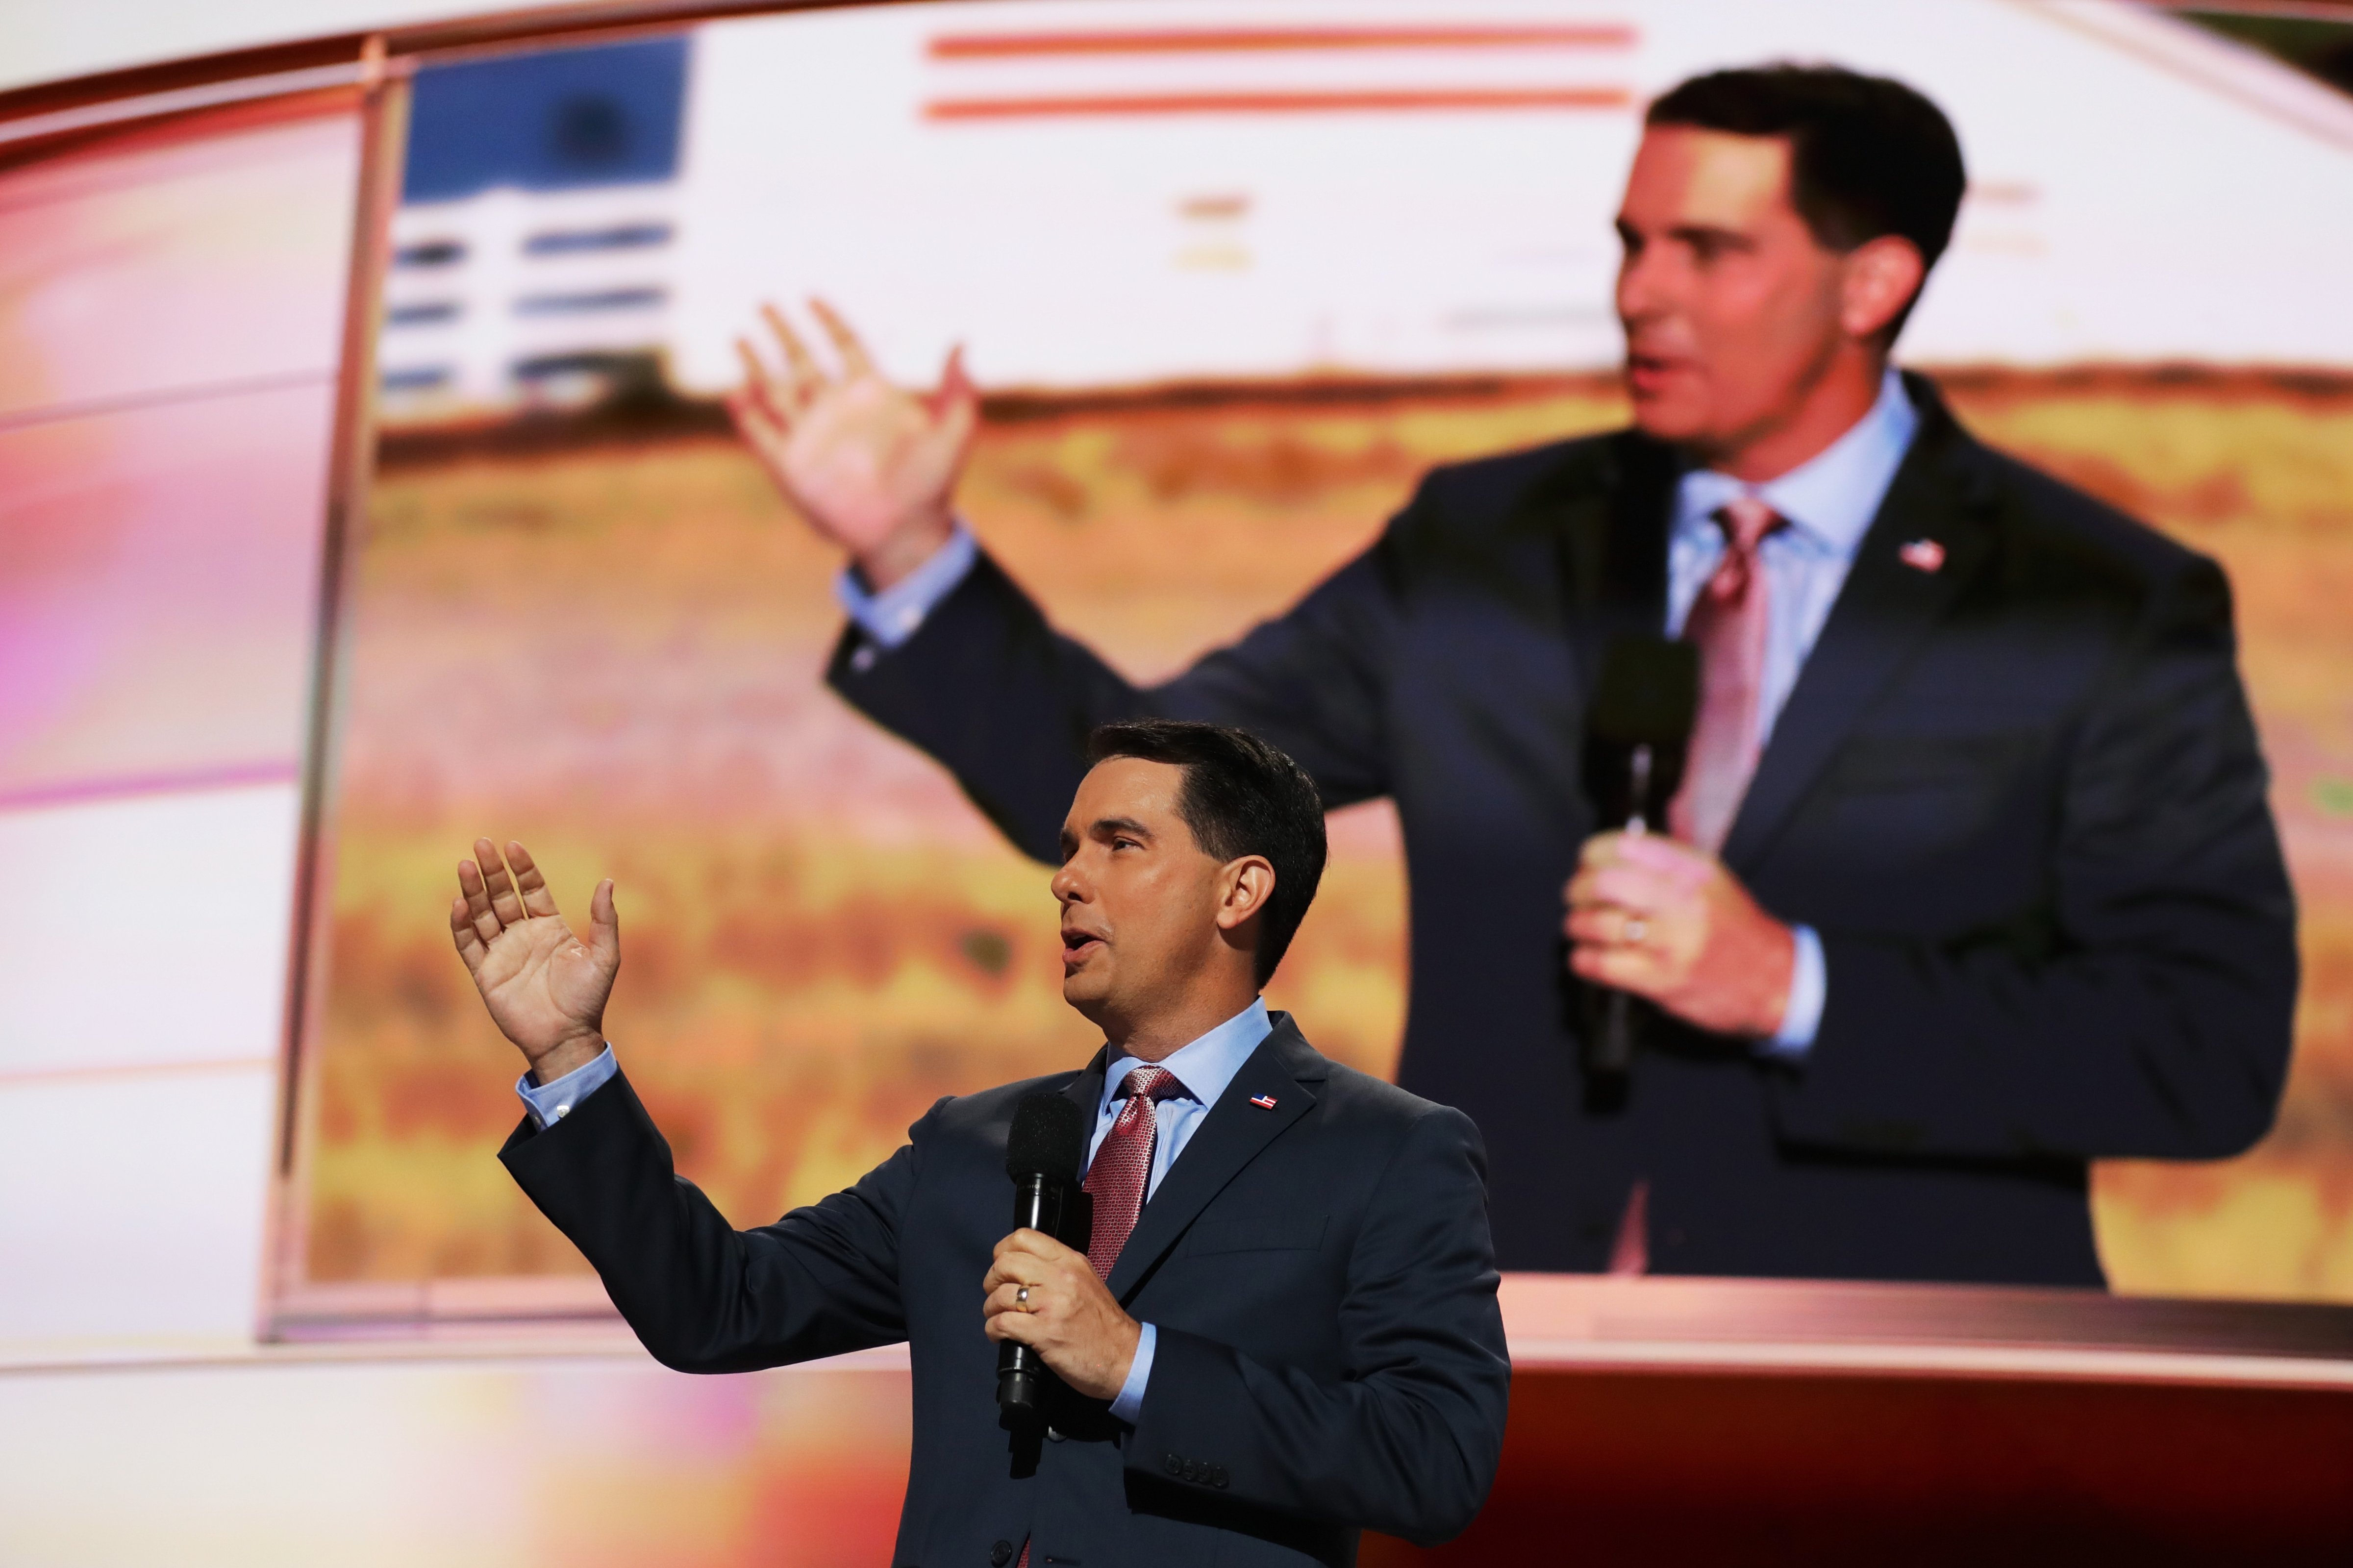 Wisconsin Gov. Scott Walker delivers a speech on the third day of the Republican National Convention on July 20, 2016 at the Quicken Loans Arena in Cleveland, Ohio. (Chip Somodevilla—Getty Images)